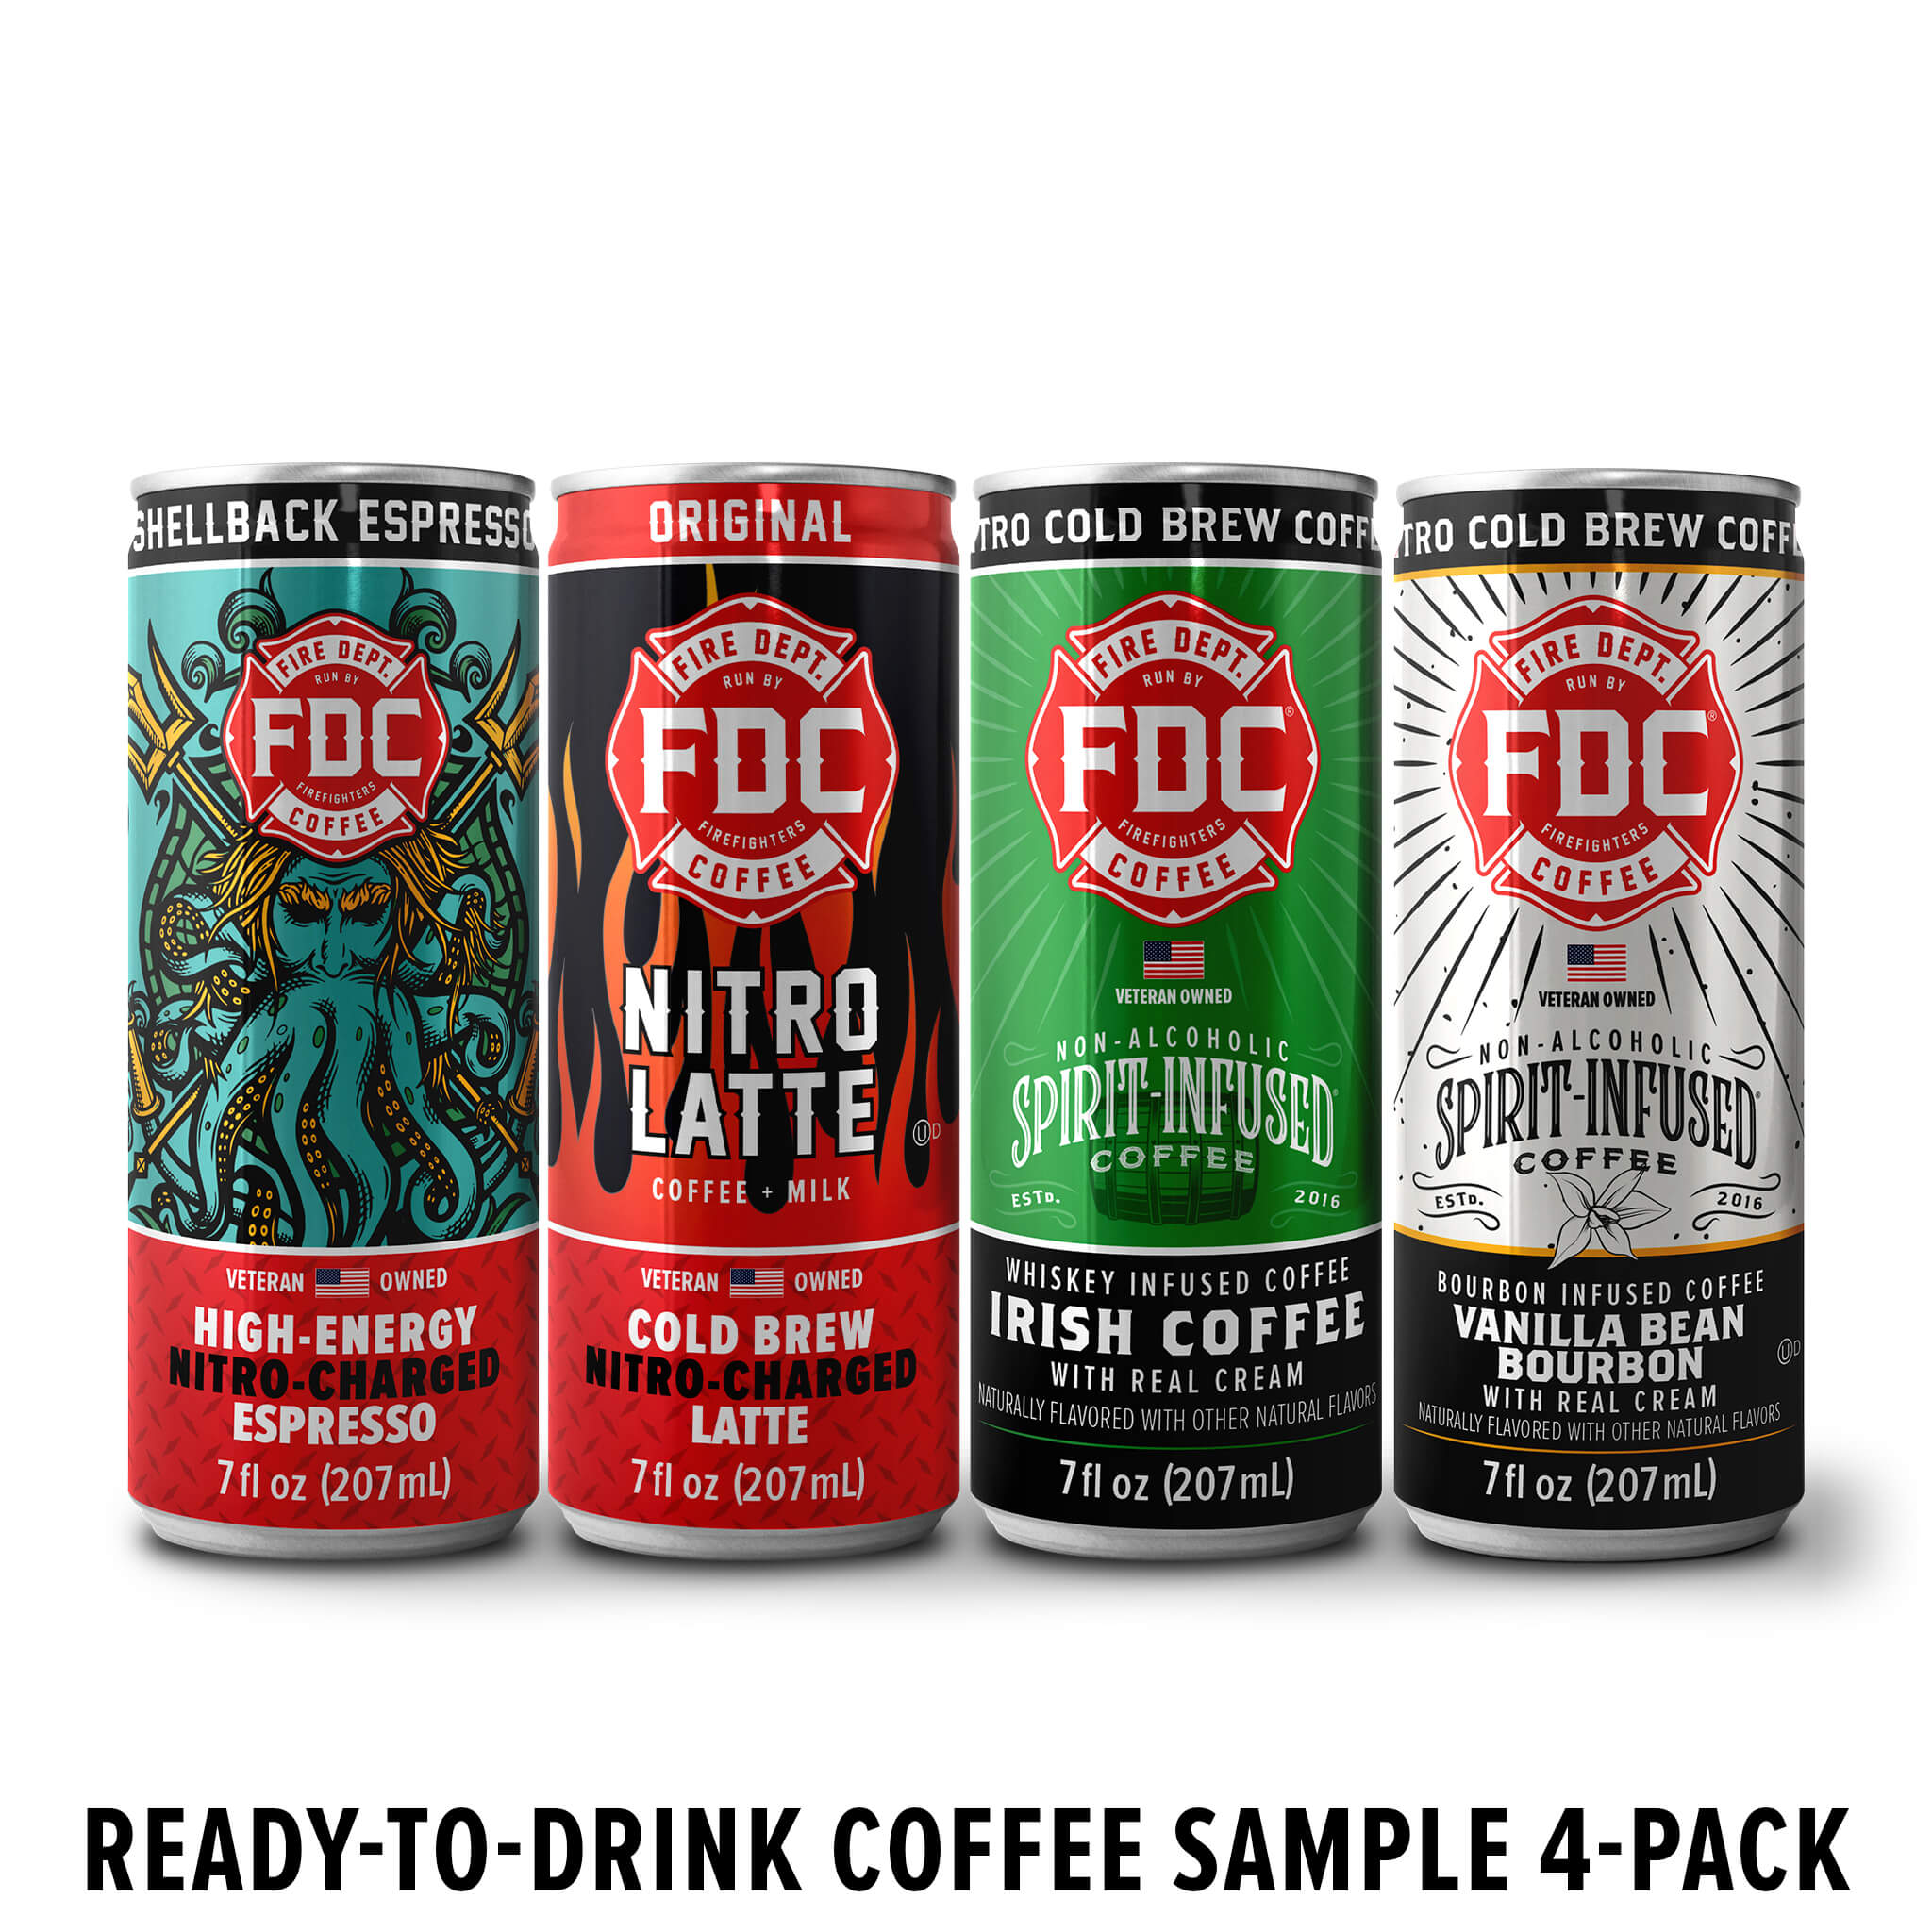 Cold brew coffee samples